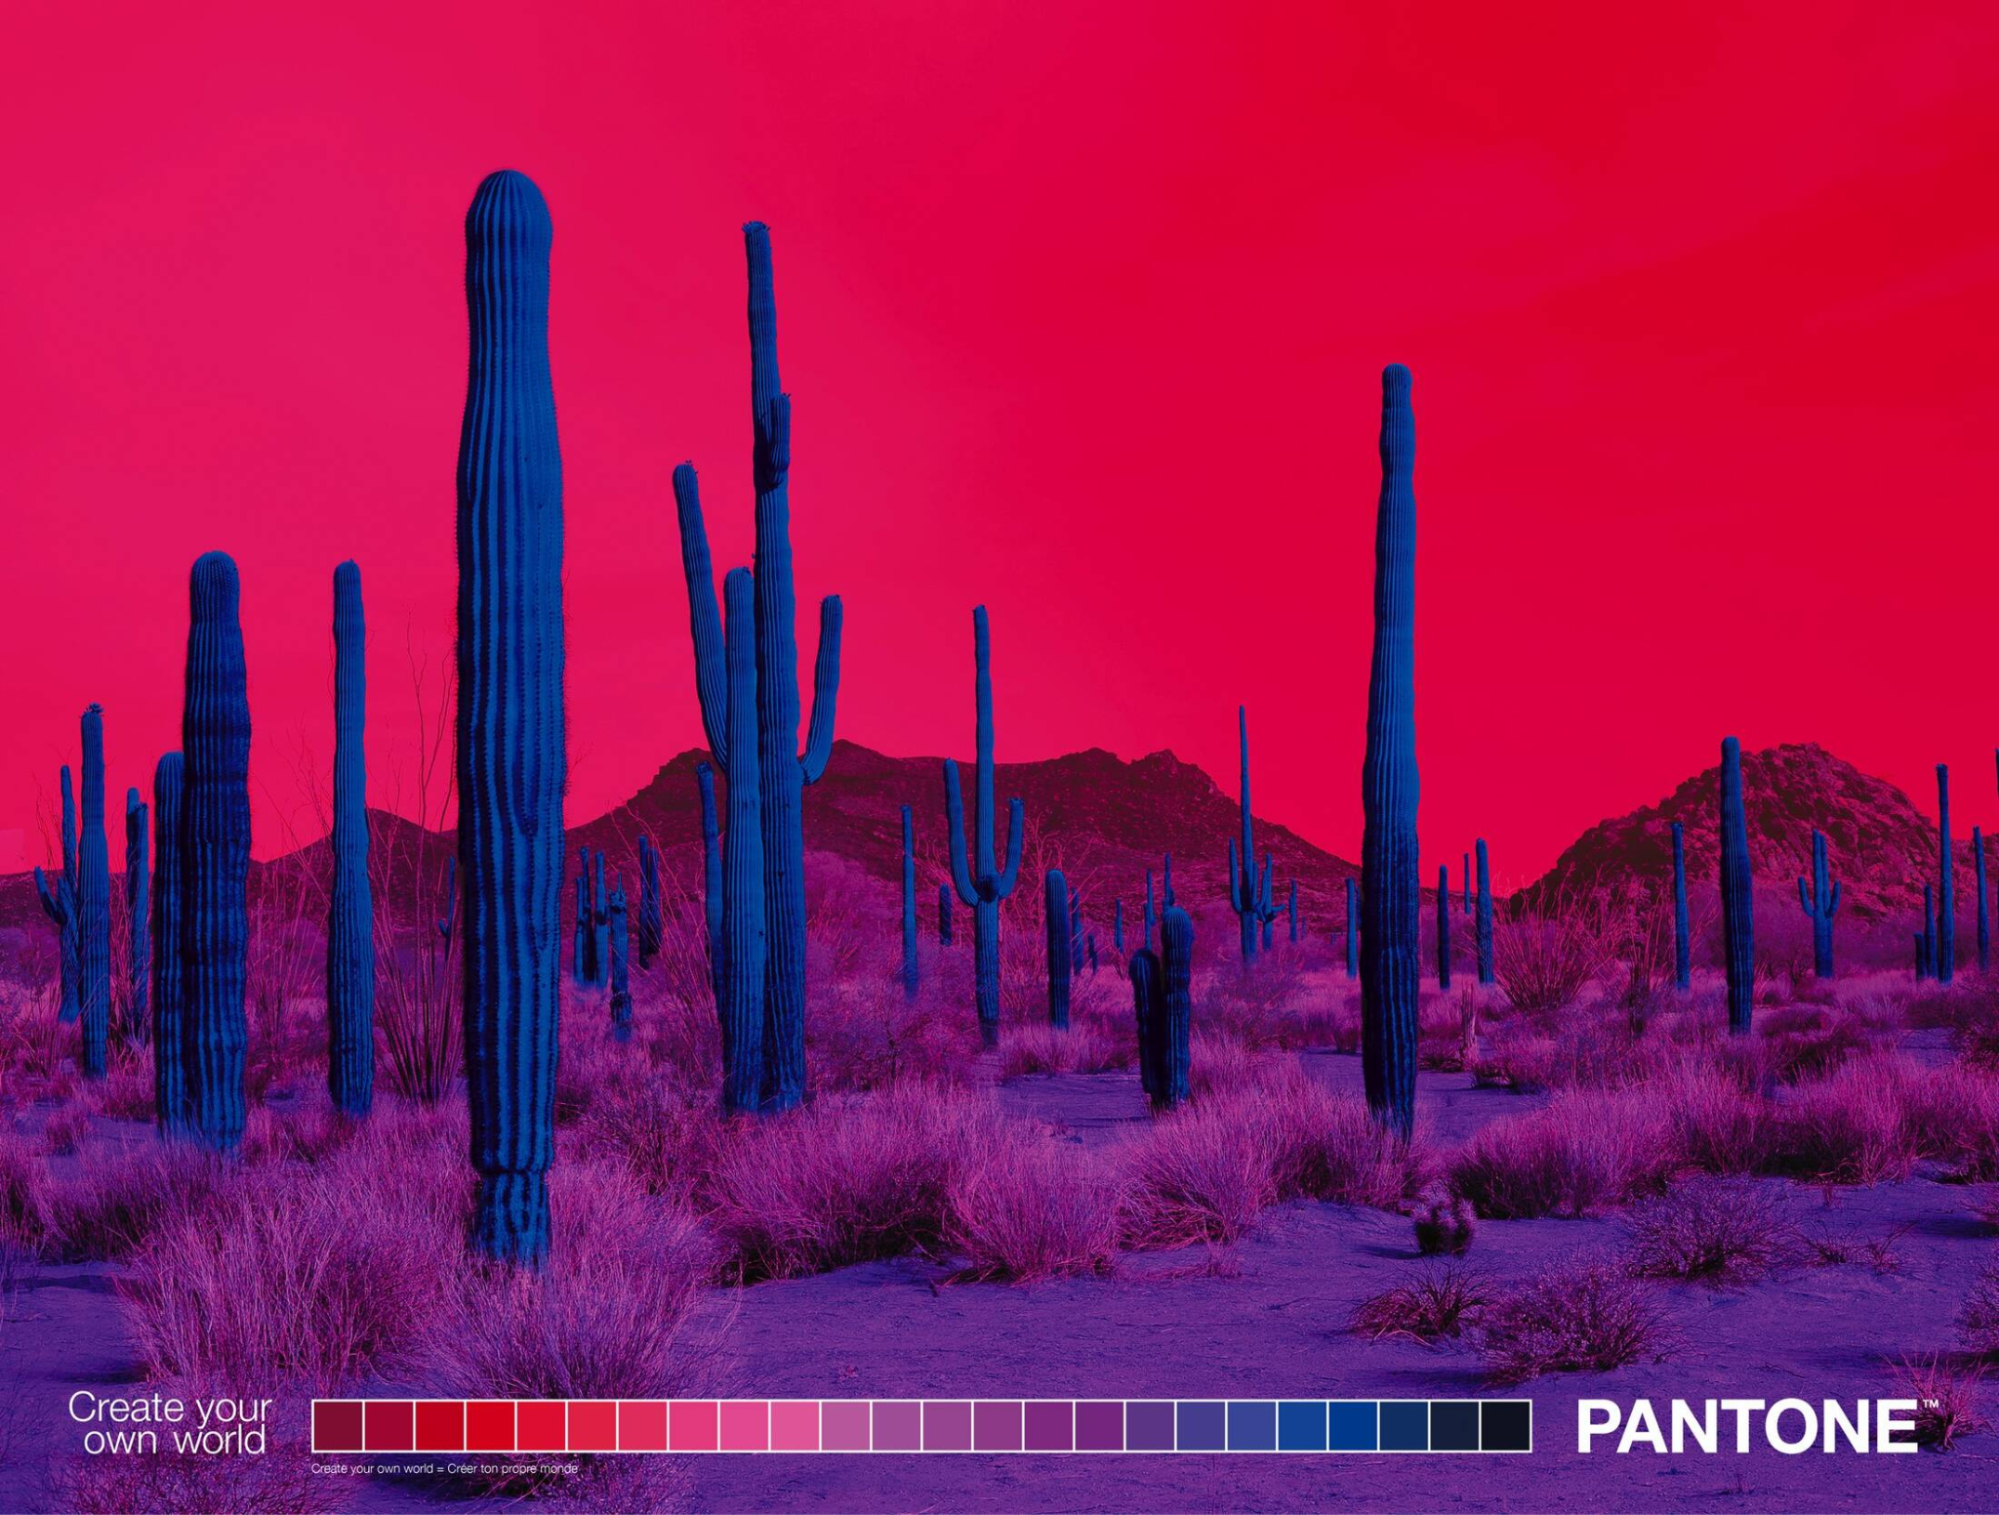 Landscape image of a desert with tall, spiky cacti set against a bright pink/red sky and purple sand.